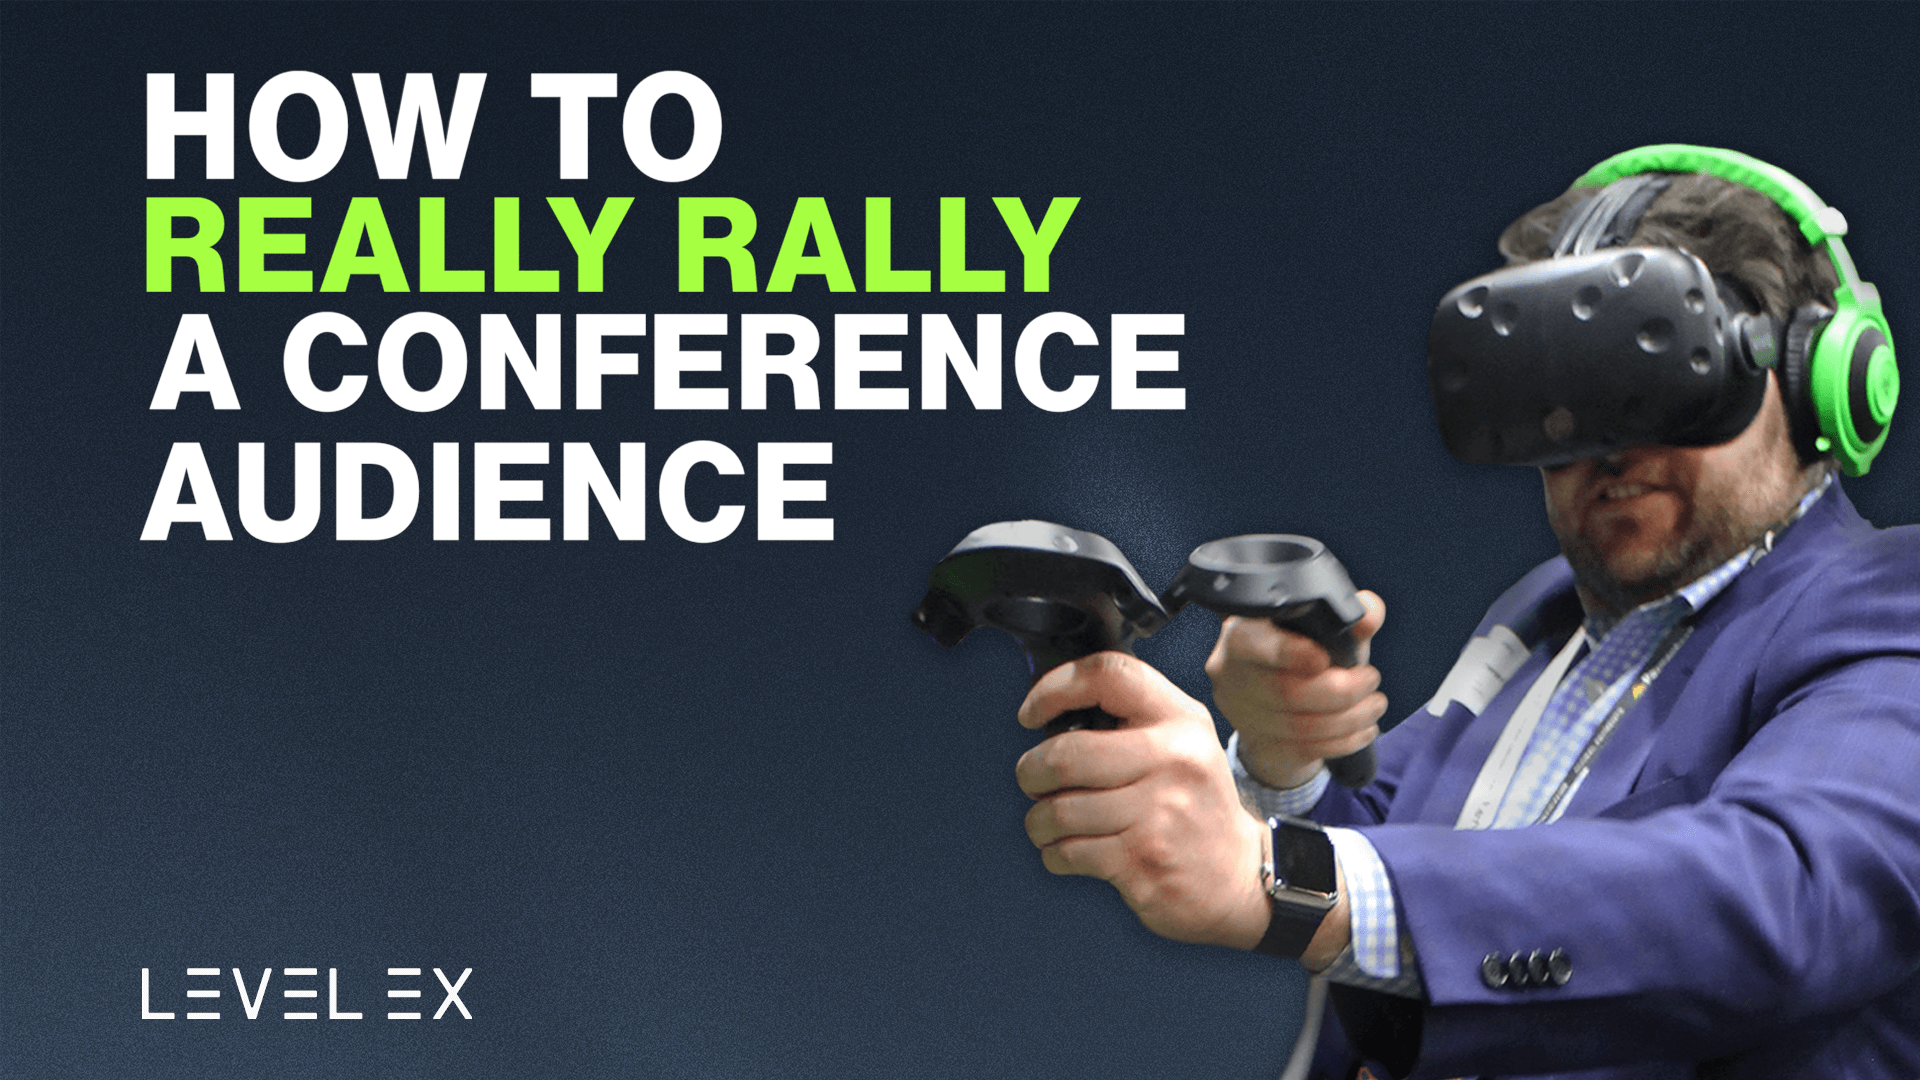 How to Really Rally a Conference Audience: 5 Do’s and Don’ts for Integrating Games, VR, and AR into a Healthcare Conference Booth